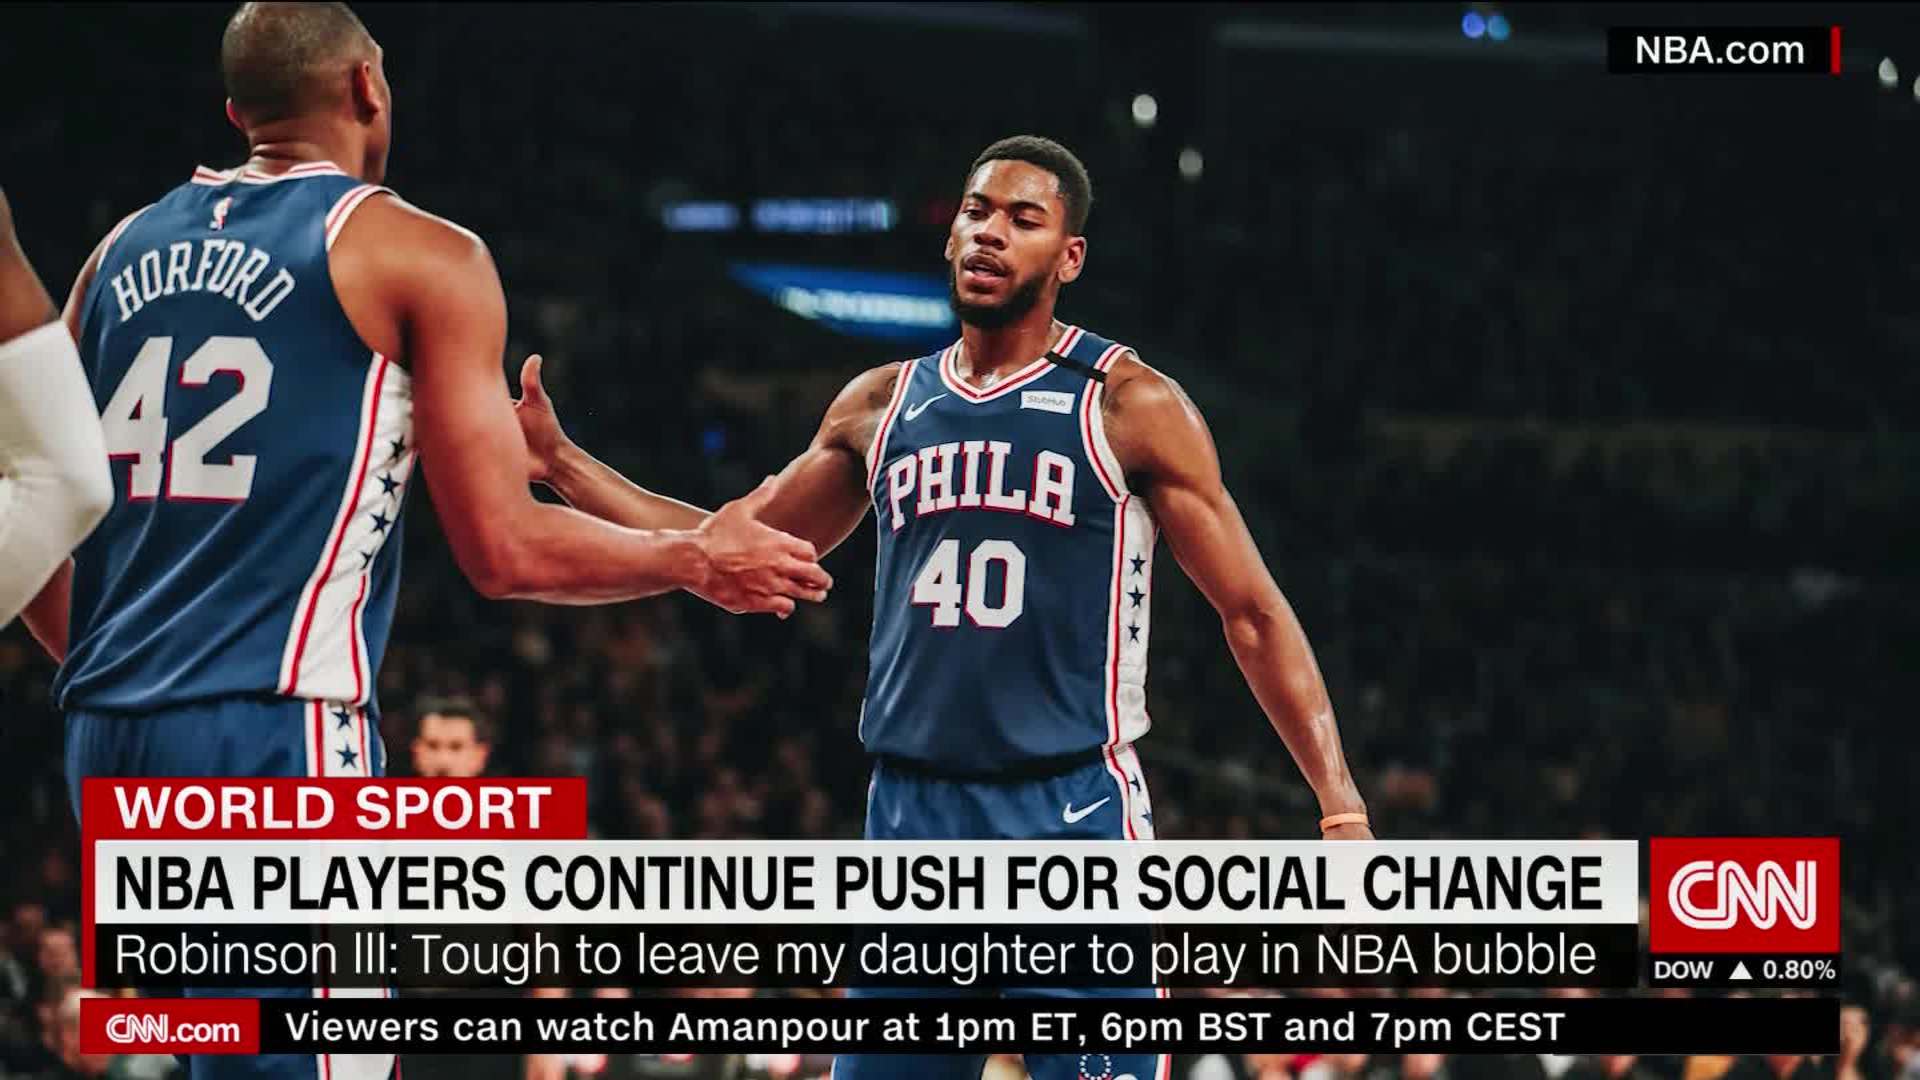 New Warrior Glenn Robinson III shares incredible story about a